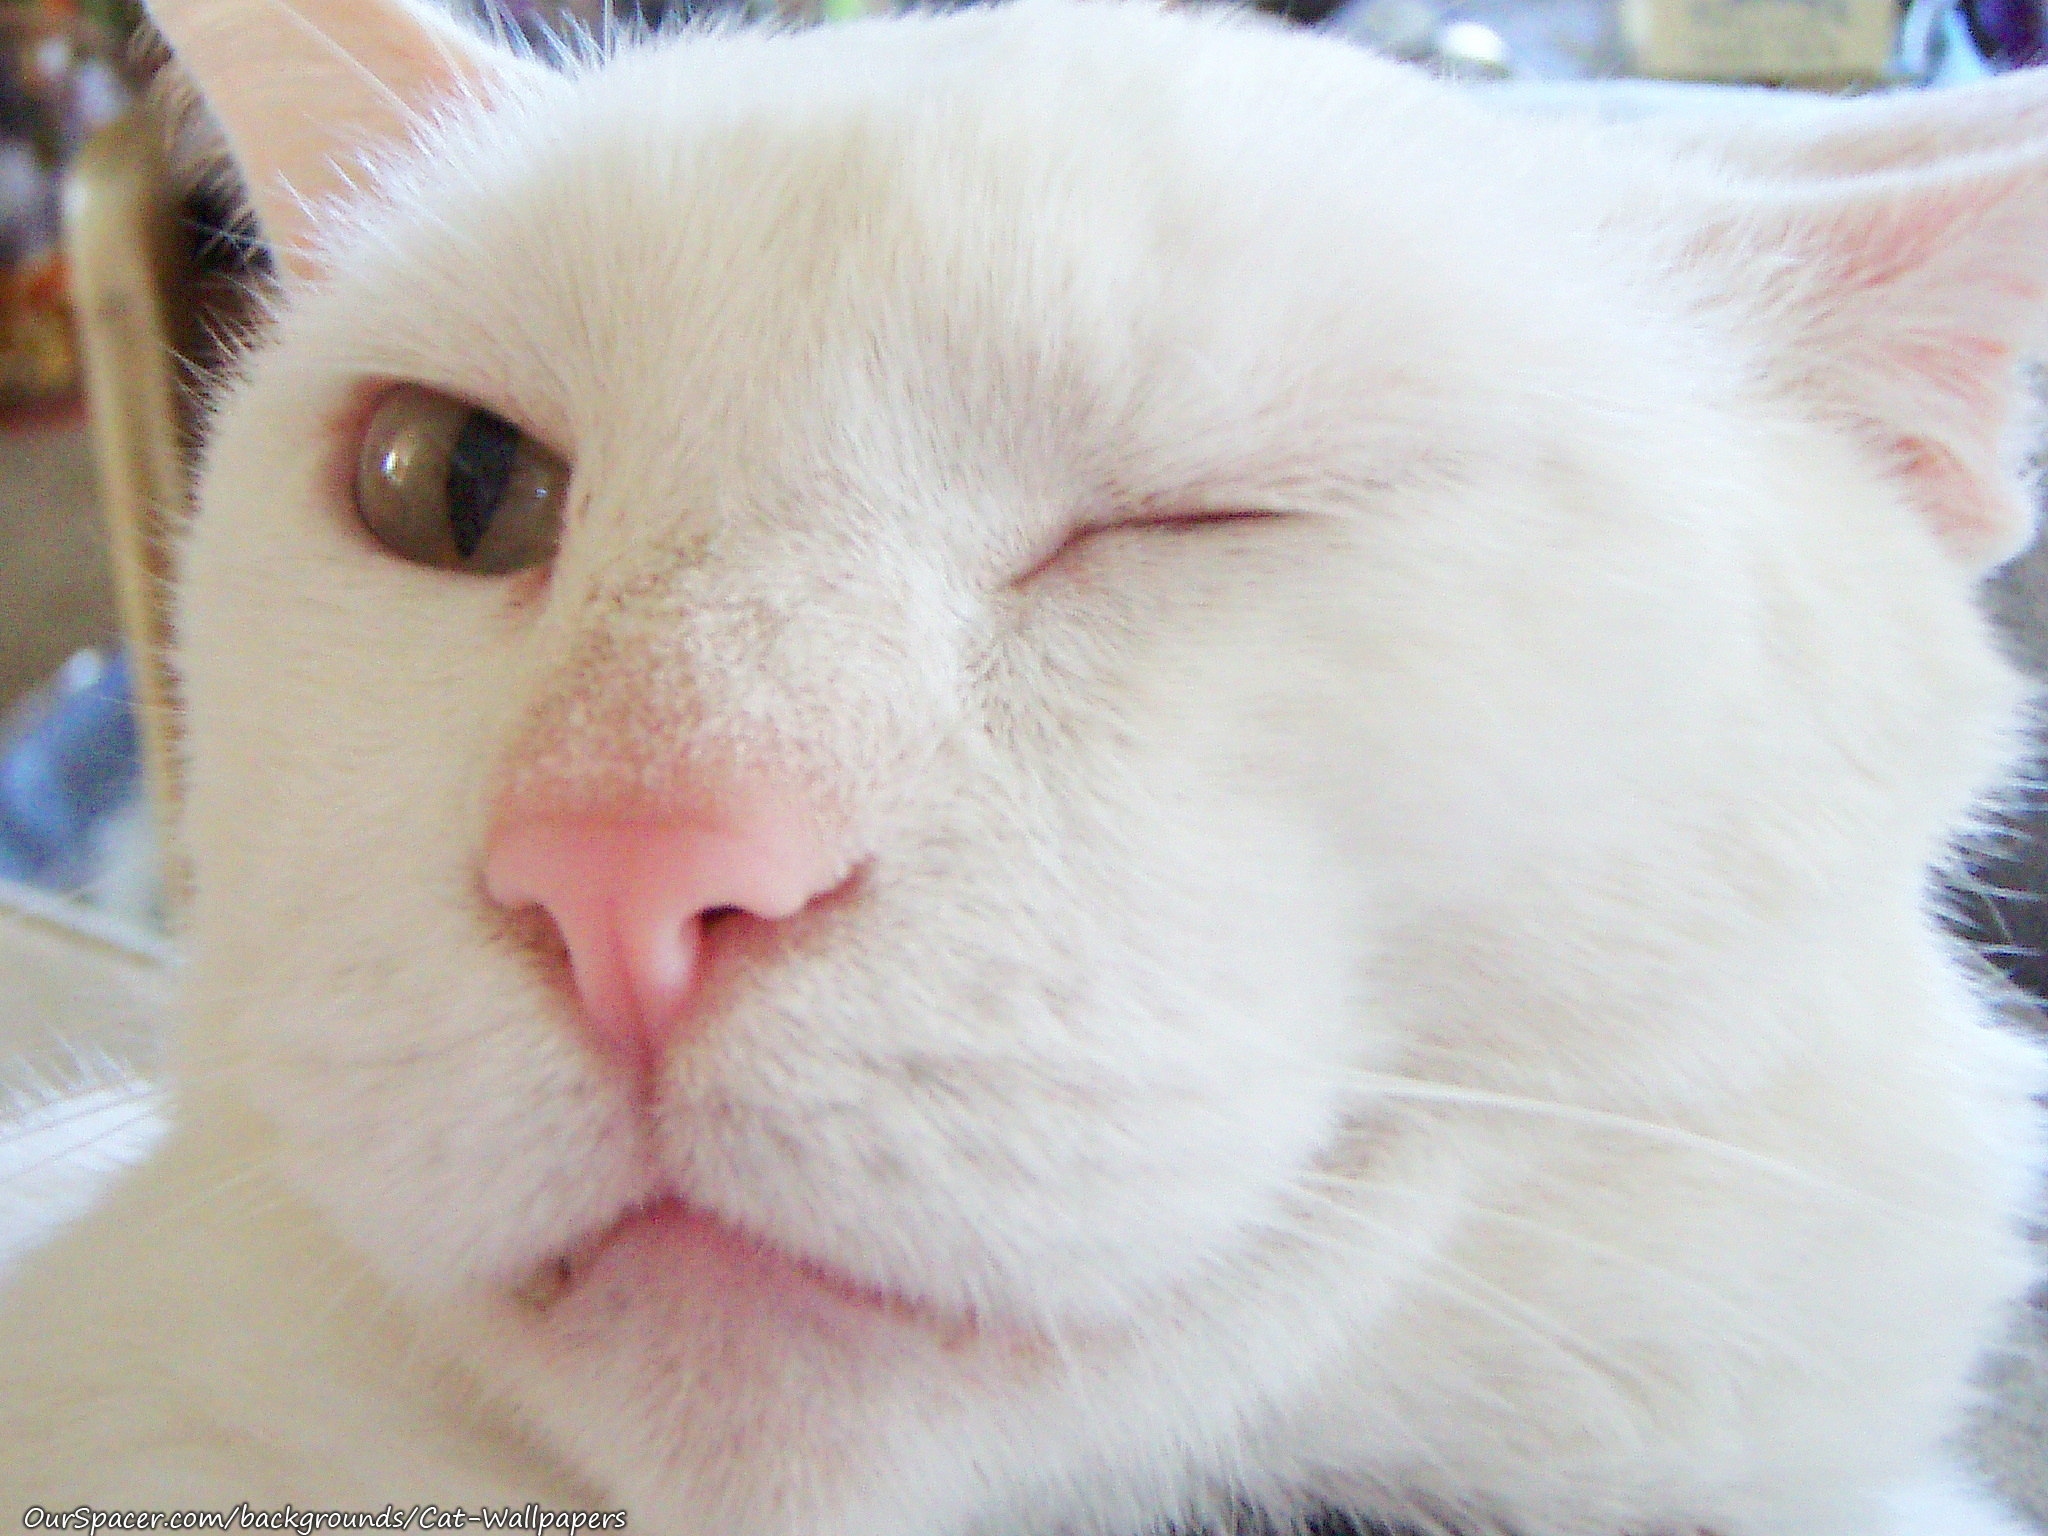 White cat winking wallpapers for myspace, twitter, and hi5 backgrounds